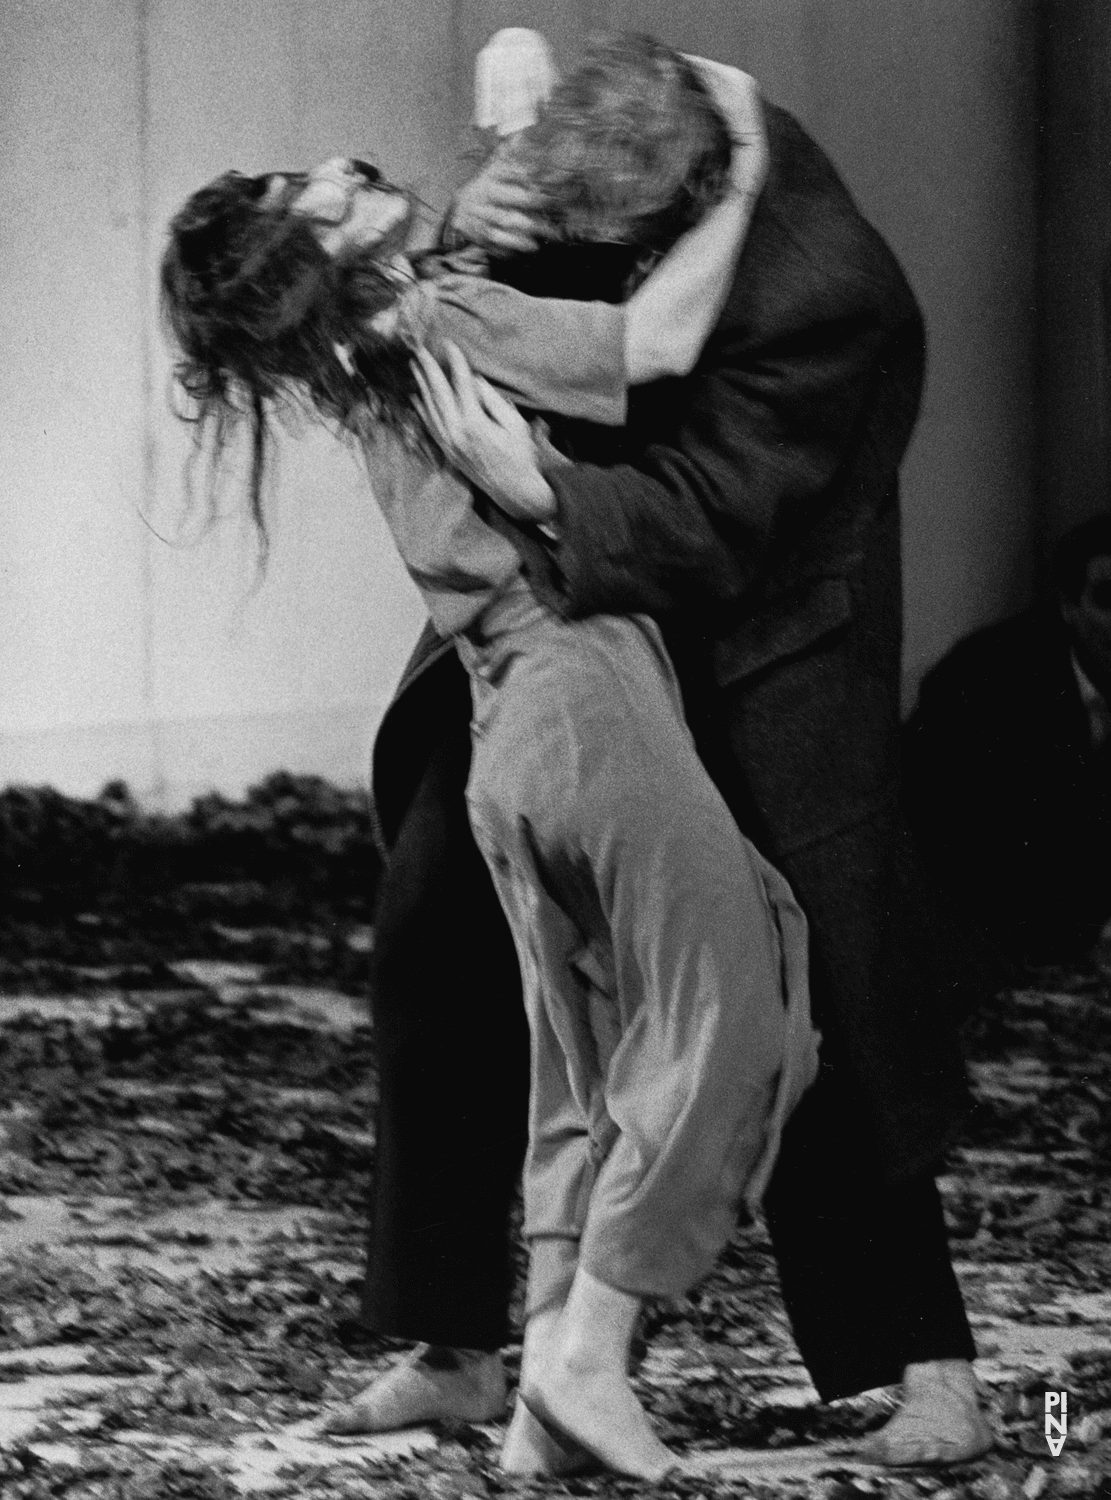 Hans Beenhakker and Beatrice Libonati in “Bluebeard. While Listening to a Tape Recording of Béla Bartók's Opera "Duke Bluebeard's Castle"” by Pina Bausch